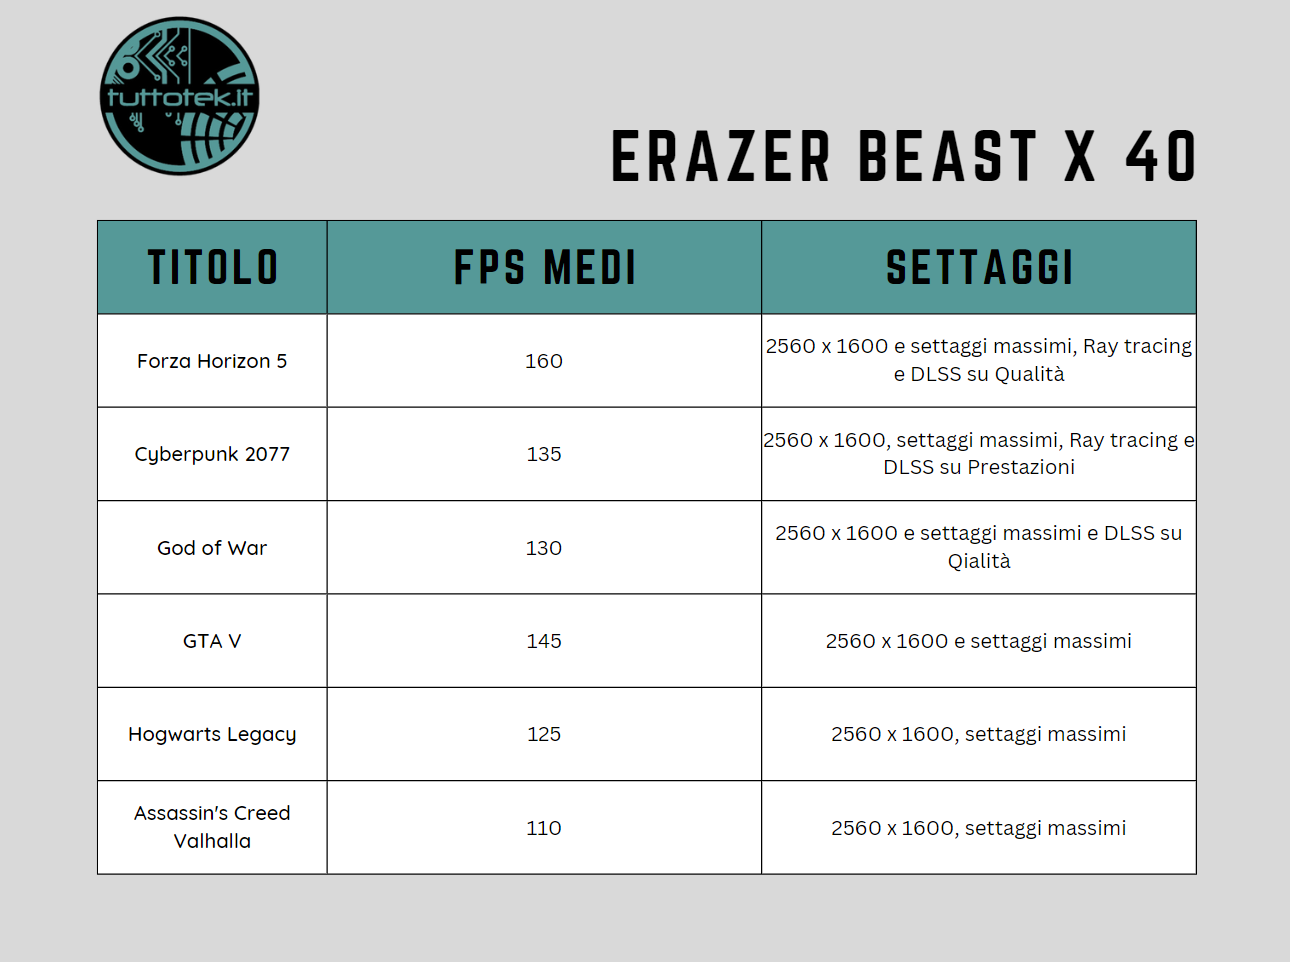 Erazer Beast X40 review: the laptop with liquid dissipation